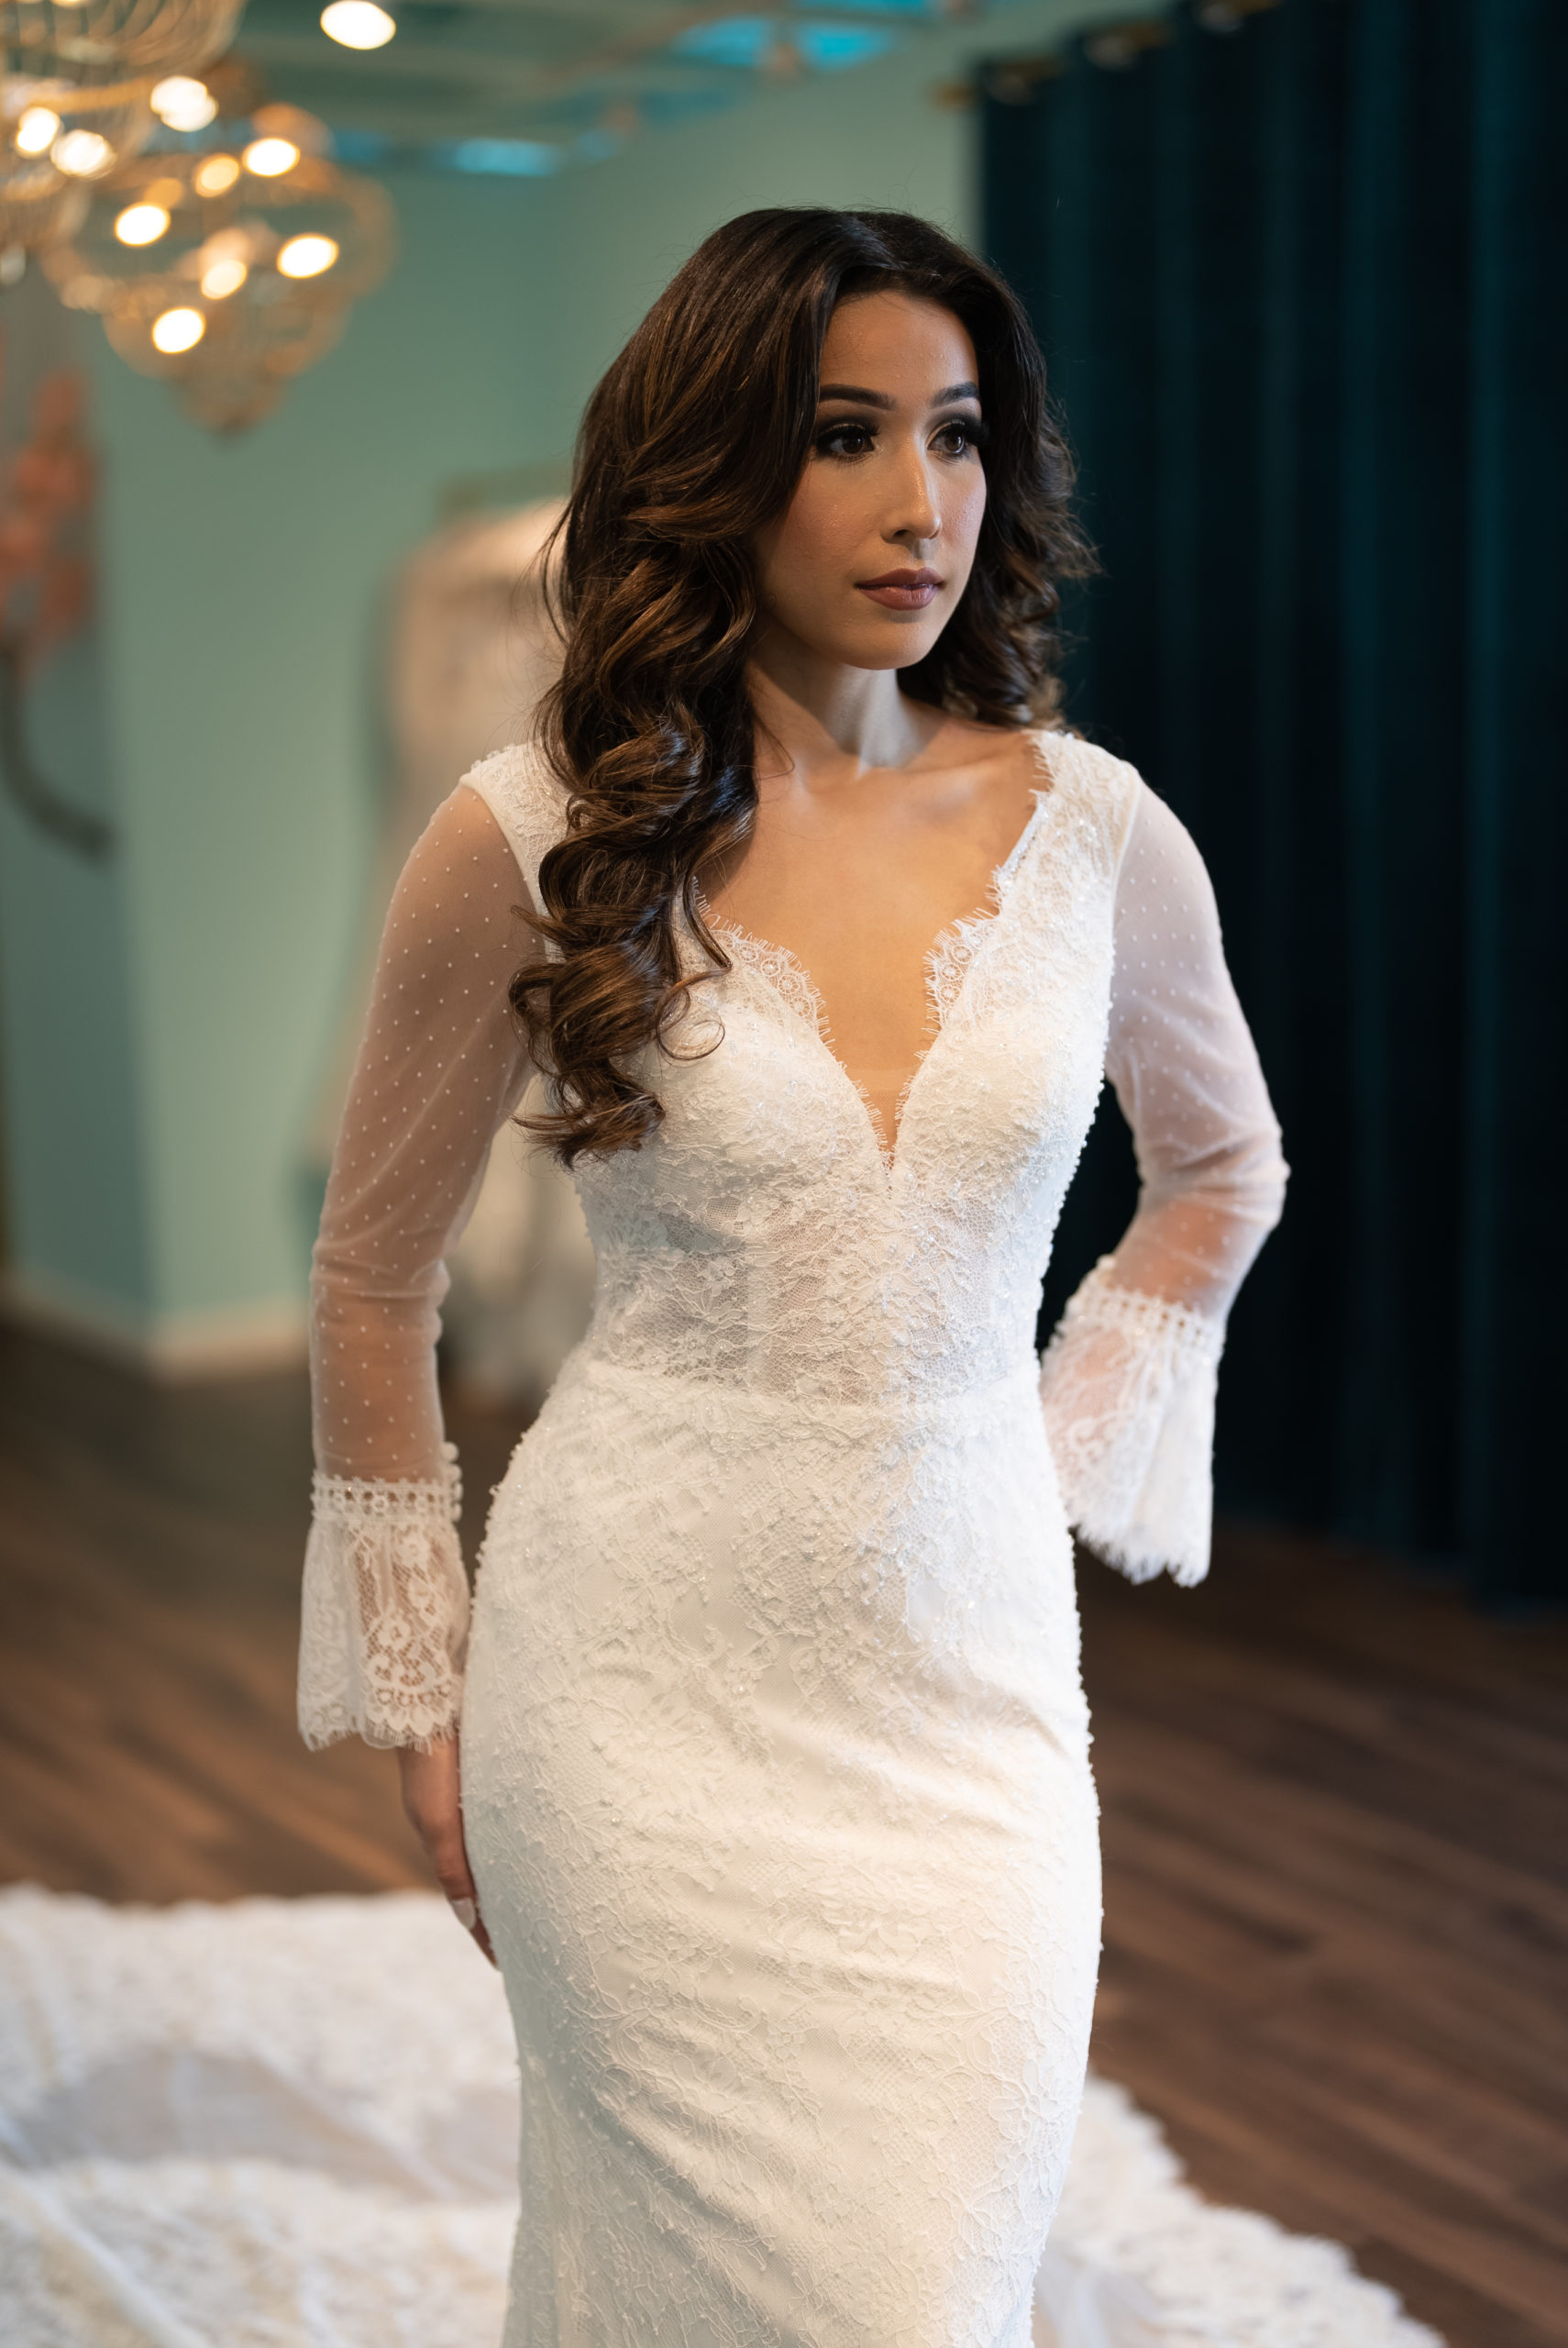 Finding the perfect gown 👰🏻‍♀️ | Gallery posted by celqtpie | Lemon8